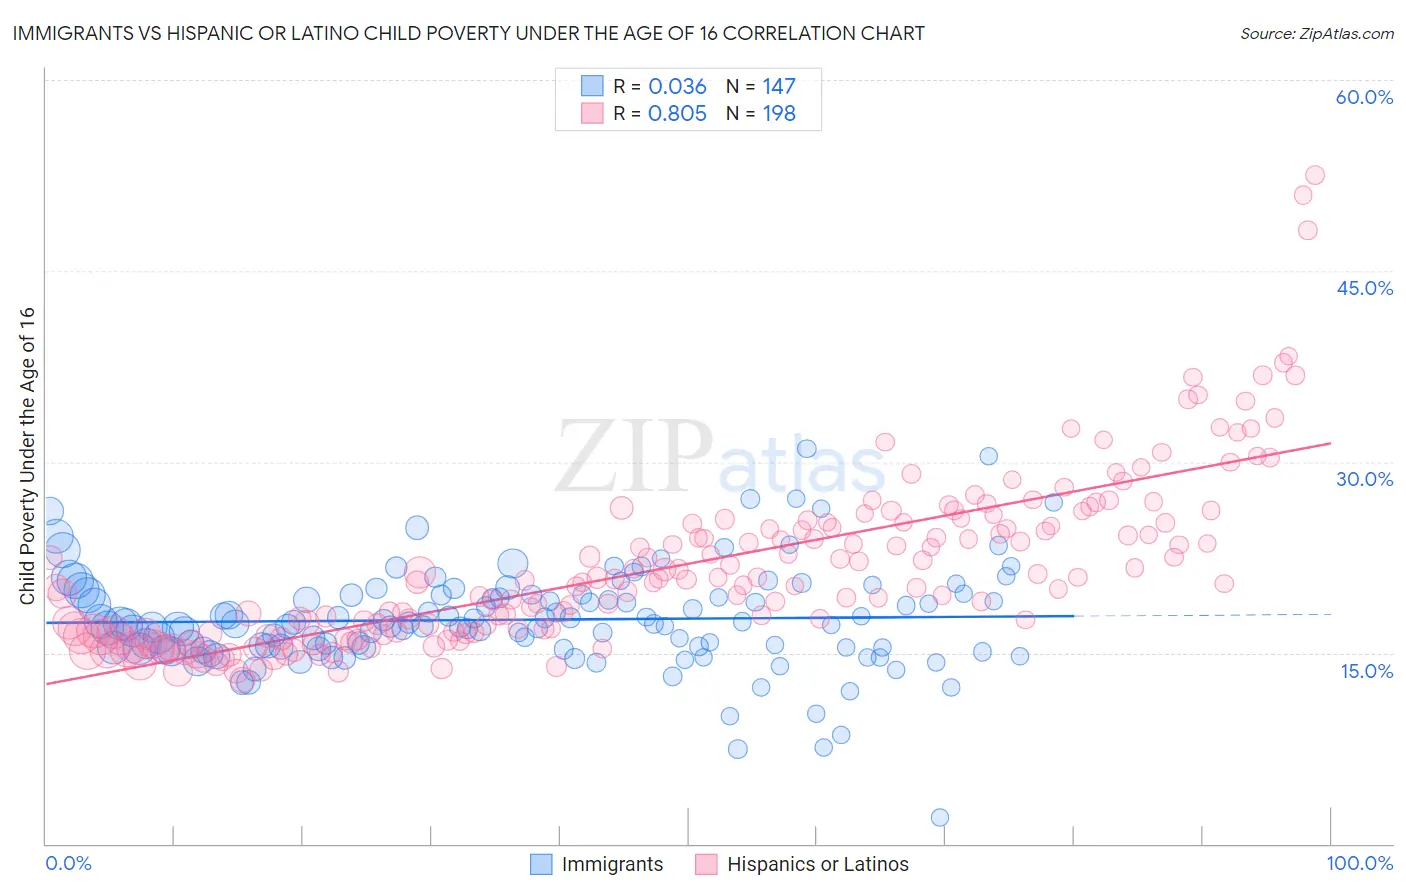 Immigrants vs Hispanic or Latino Child Poverty Under the Age of 16